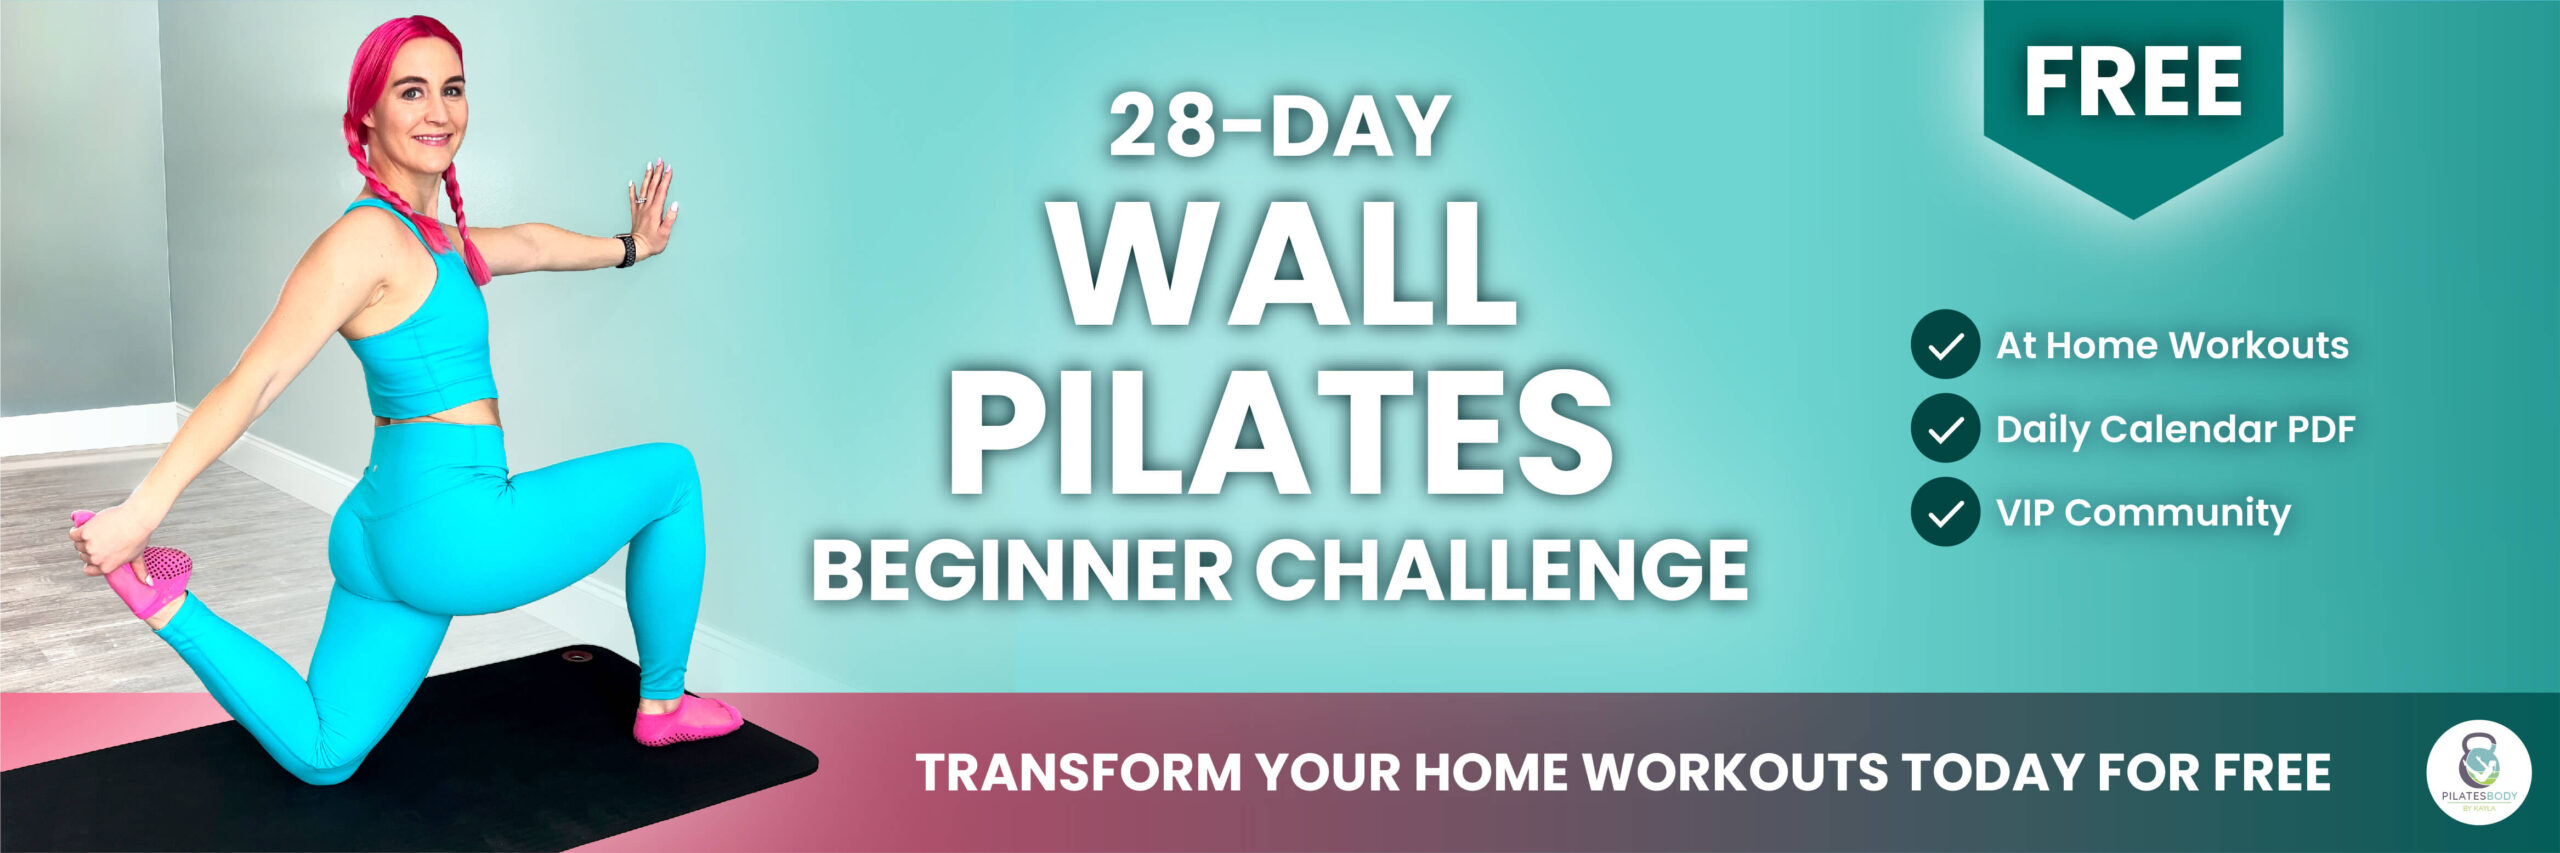 Free 28-Day Beginner Wall Pilates Challenge on YouTube - Transform Your At Home Pilates Workouts - PILATESBODY by Kayla